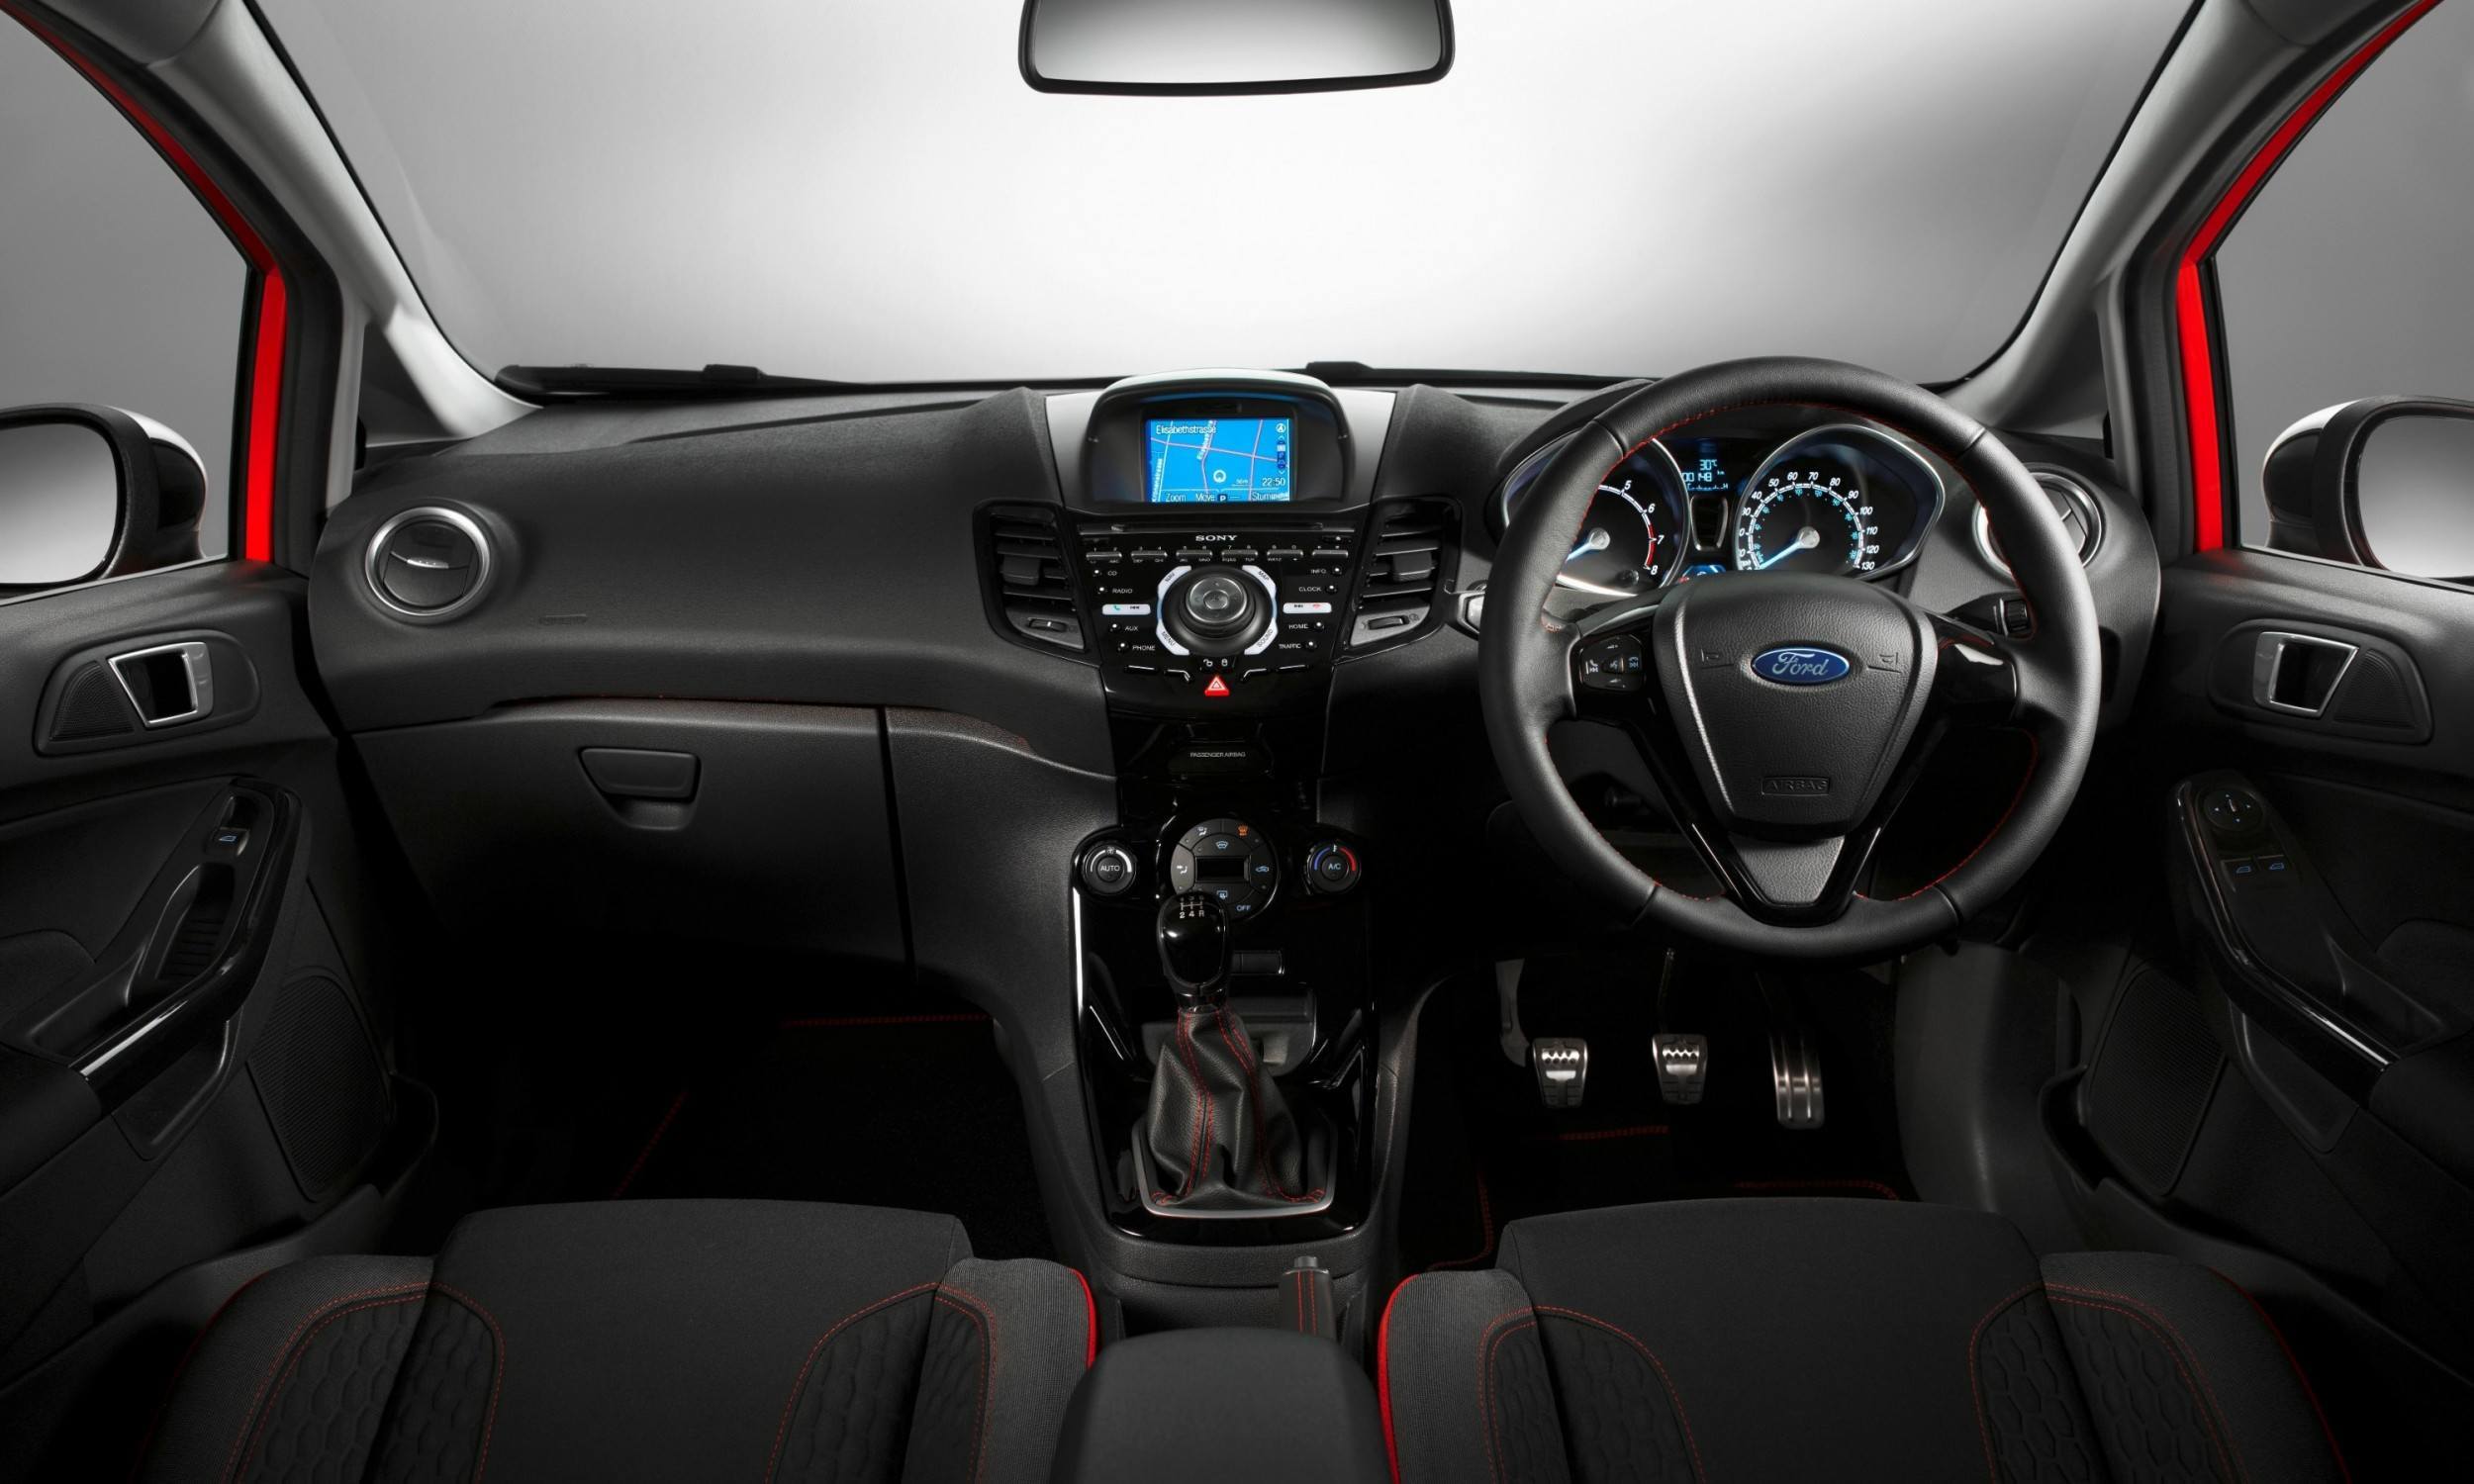 2014 Ford Fiesta Red Edition and Fiesta Black Edition Announced for UK 2